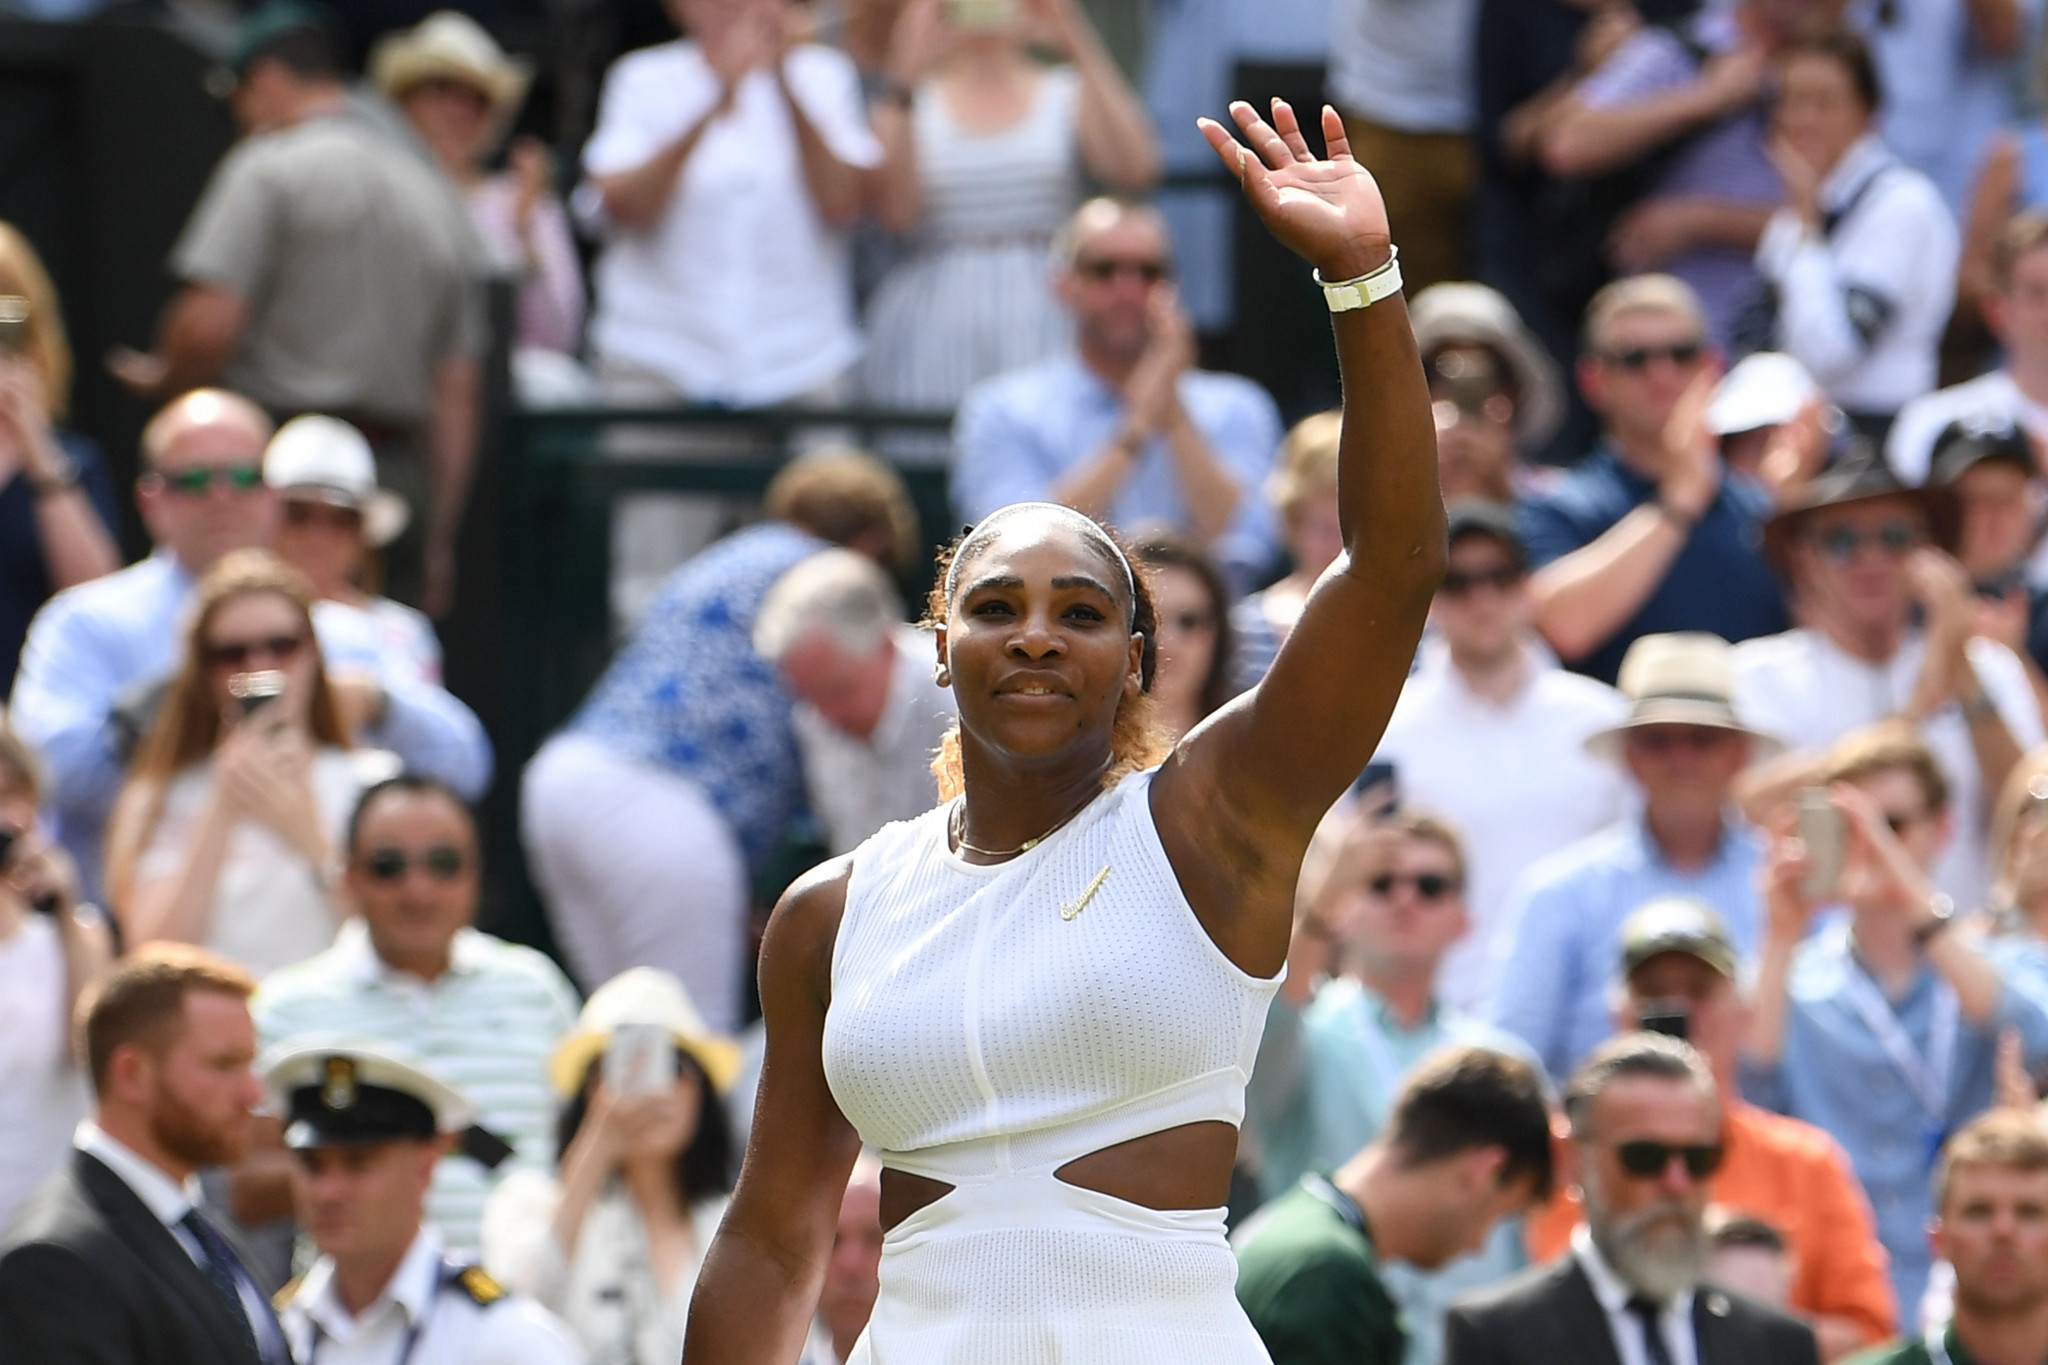 The other women's singles finalist is seven-times champion Serena Williams, who comprehensively beat Czech Republic's Barbora Strýcová ©Getty Images